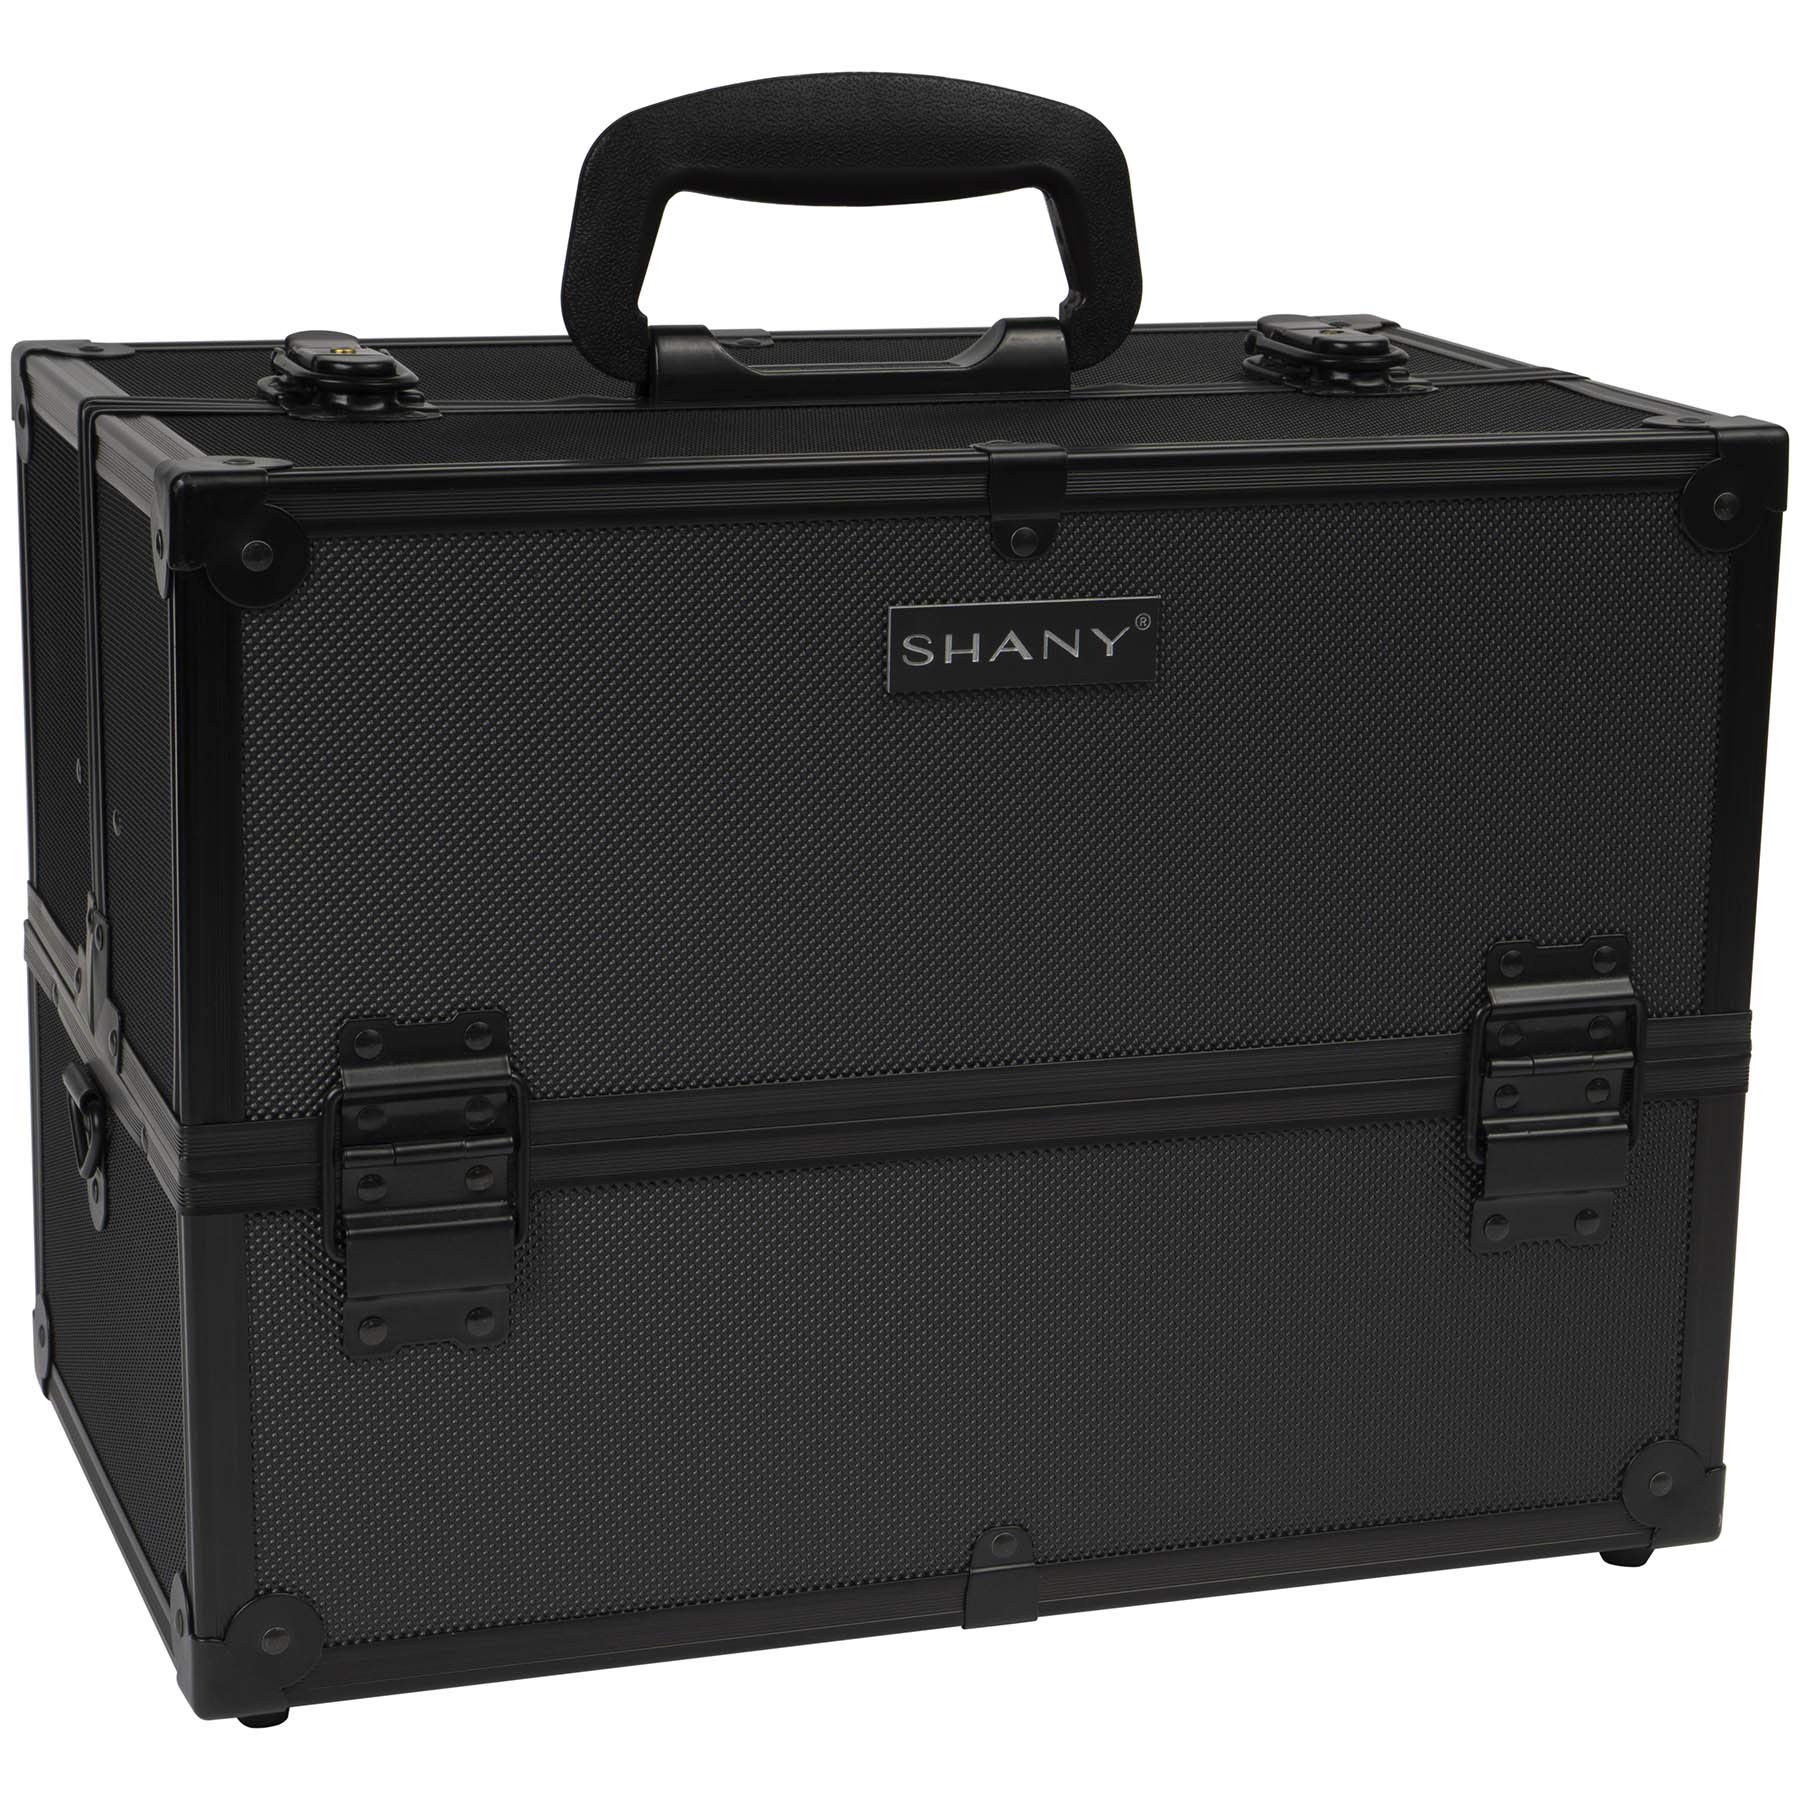 SHANY Essential Pro Makeup Train Case with Shoulder Strap and Locks - Black On Black